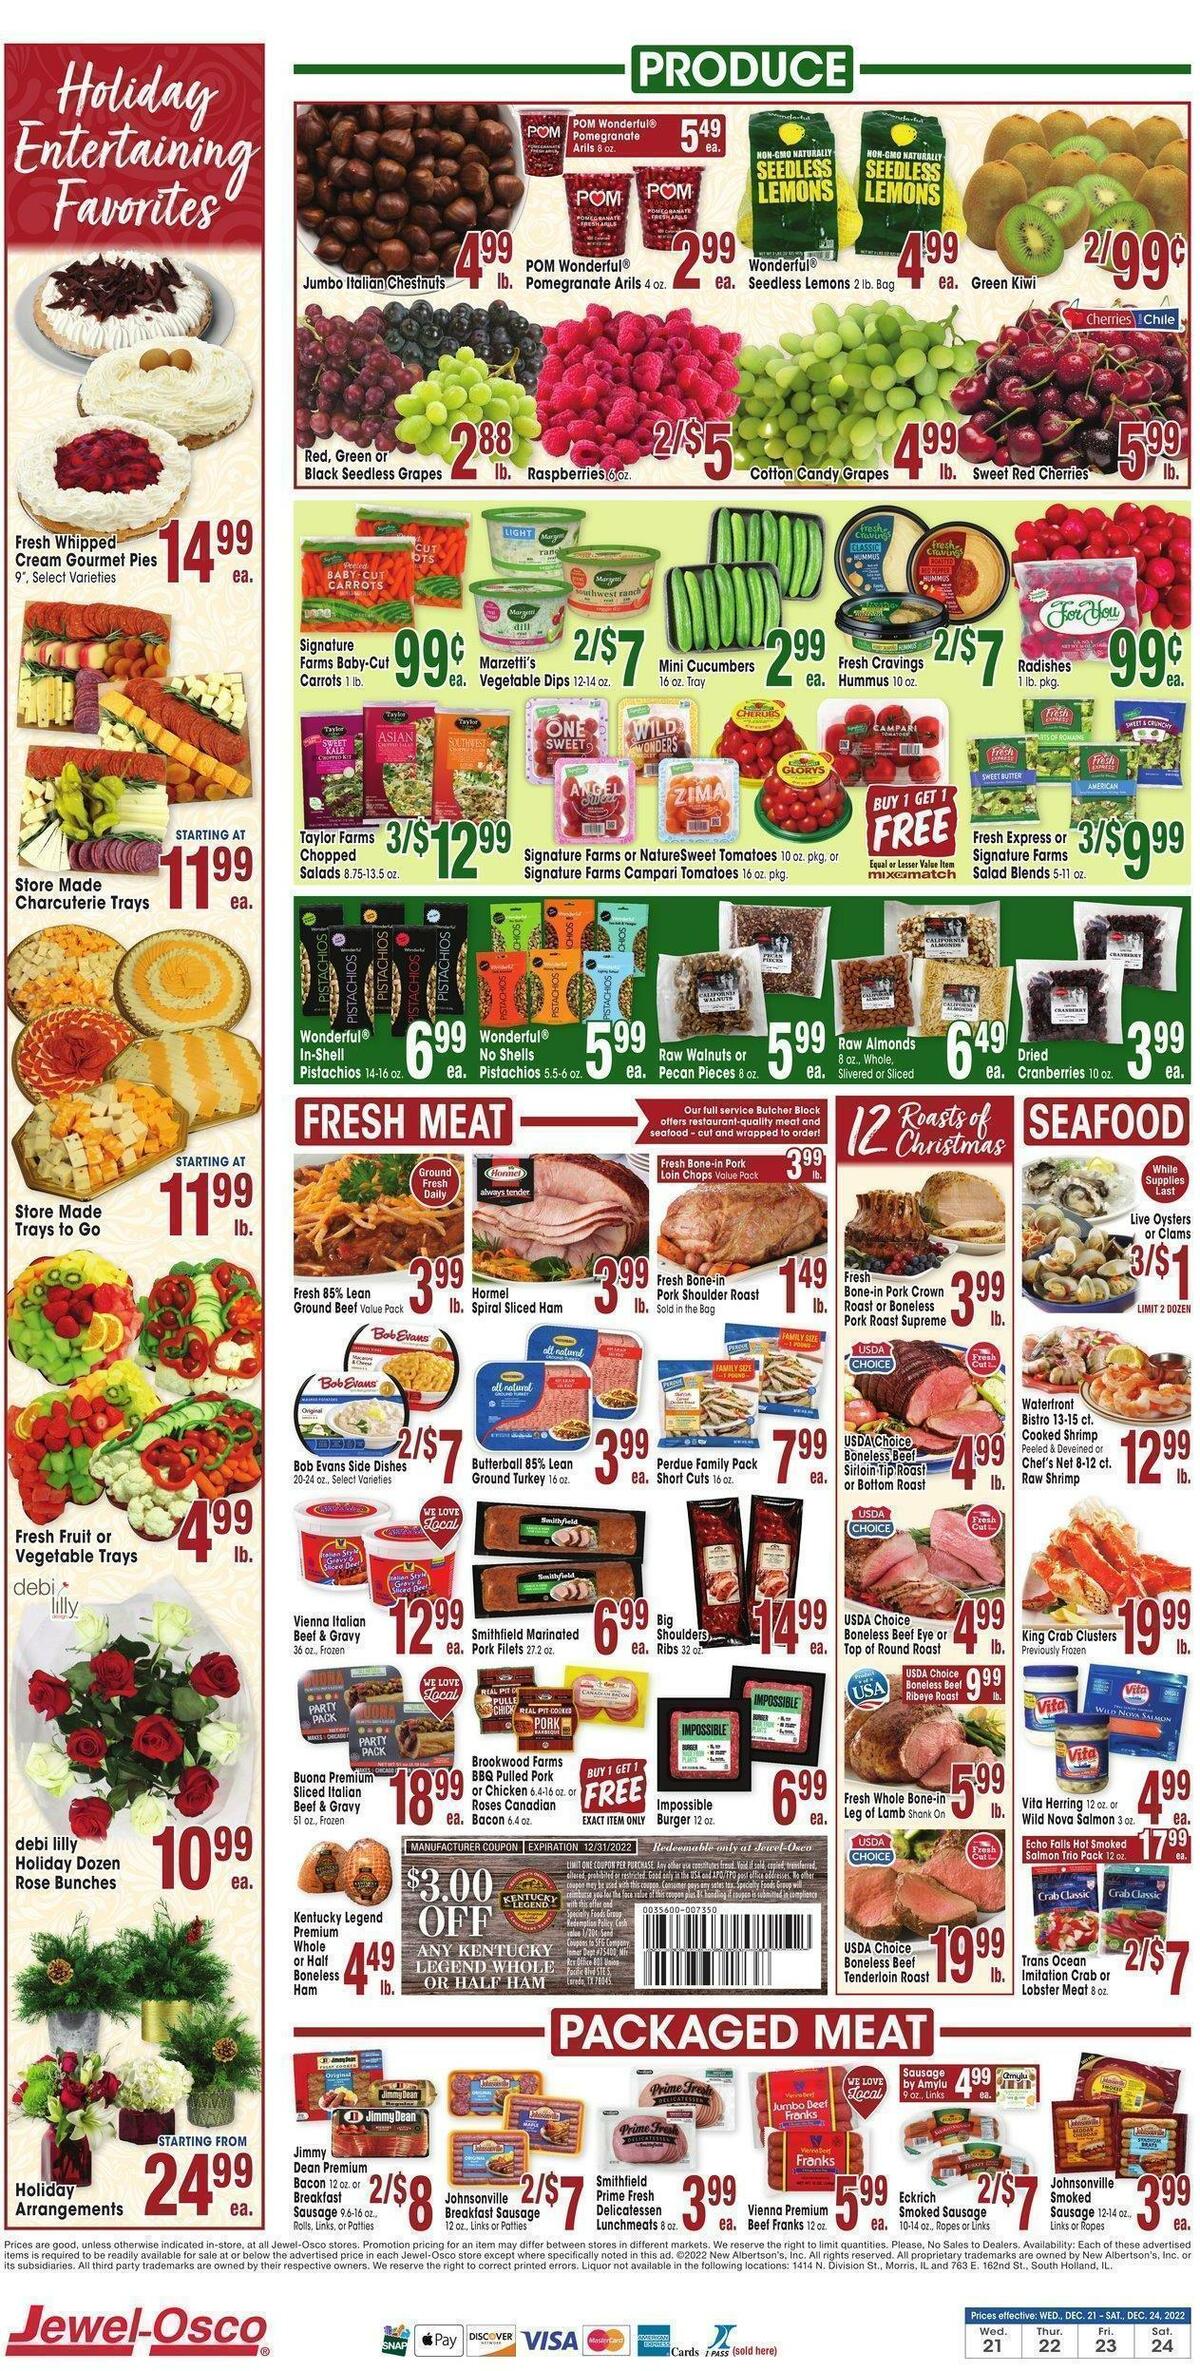 Jewel Osco Weekly Ad from December 21